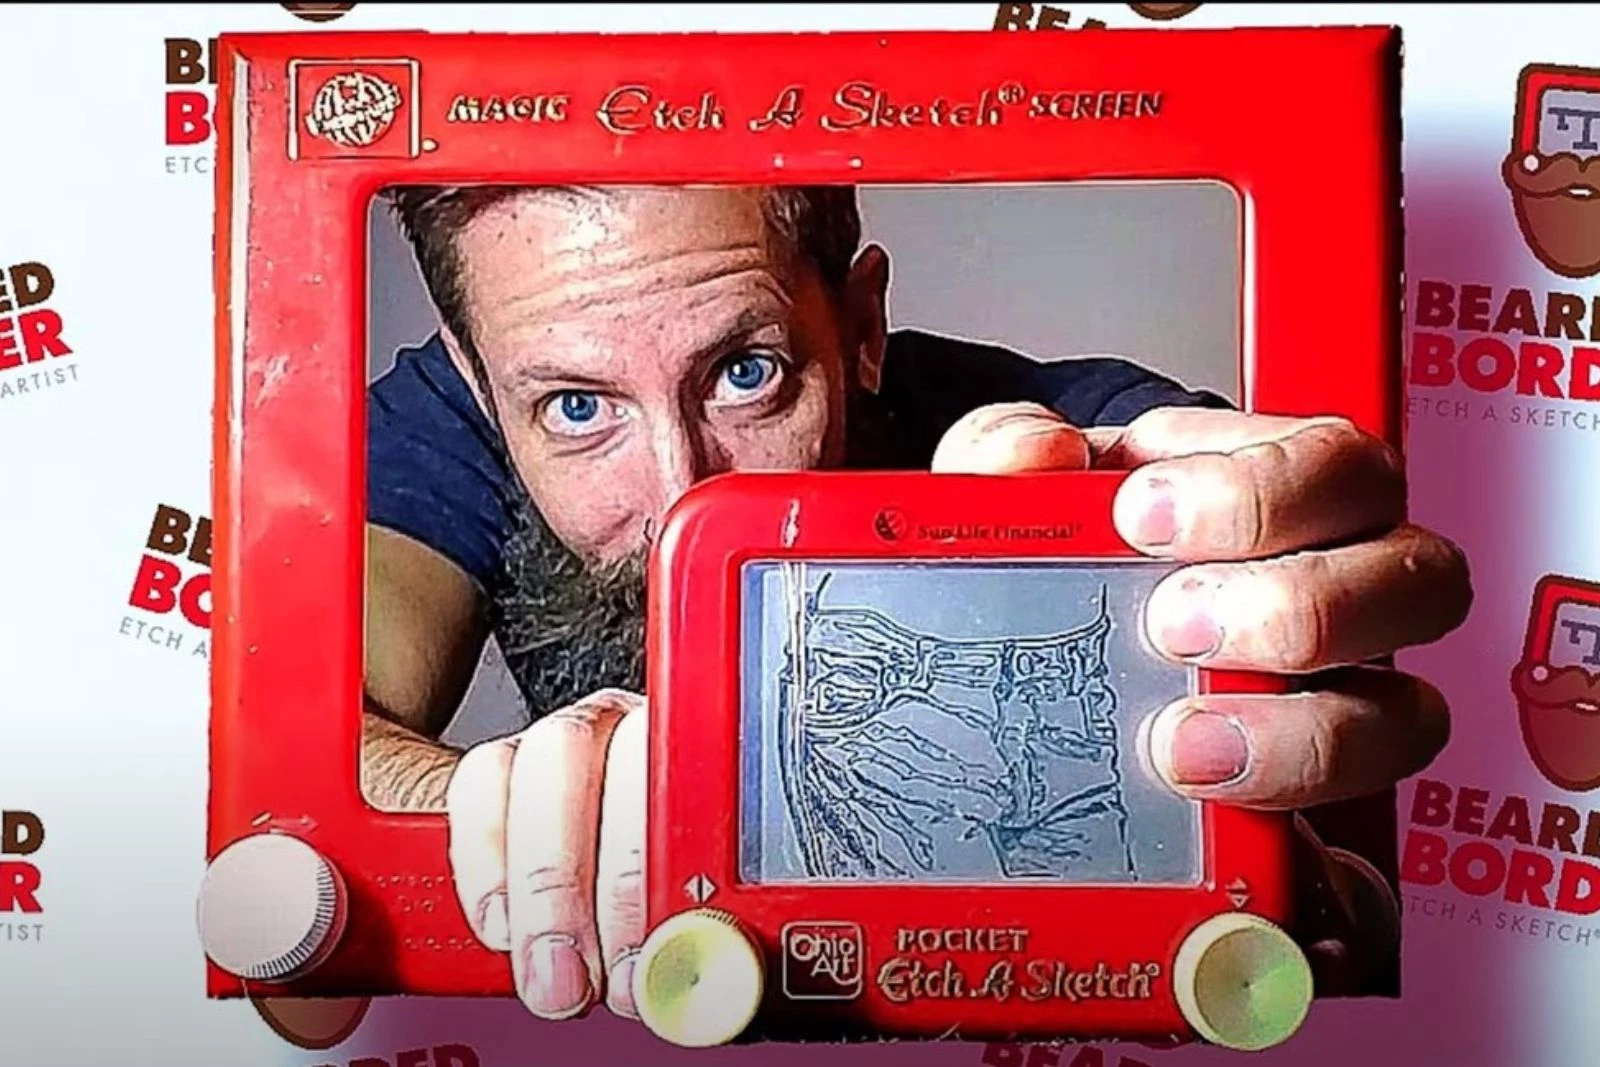 Pimp Your Pictures With the Insta Etch A Sketch App